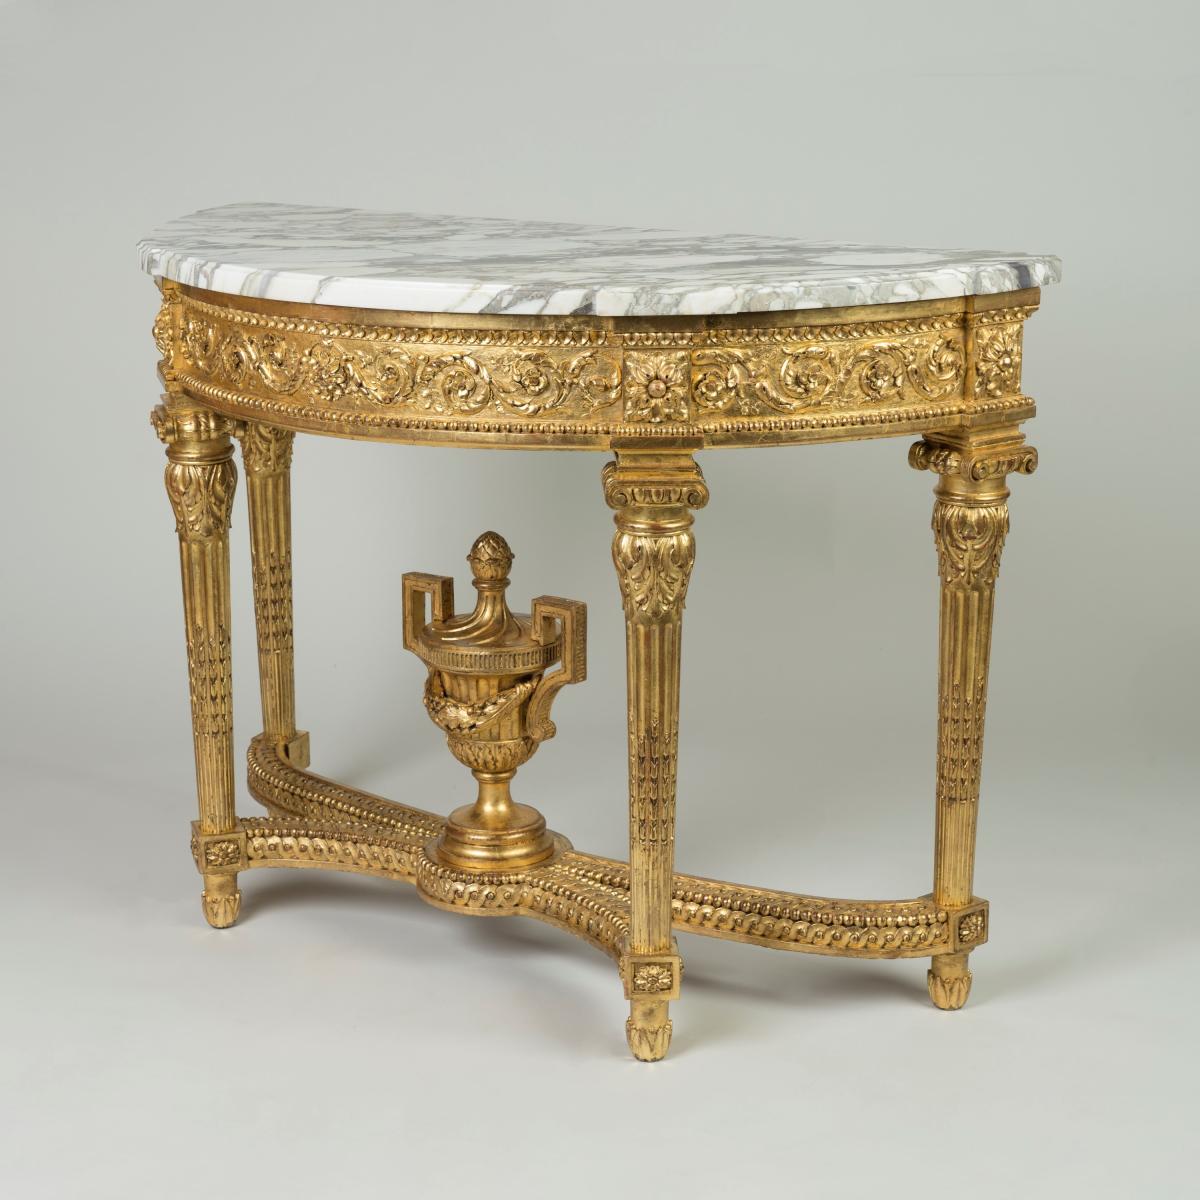 Important Pair of Stately Console Tables